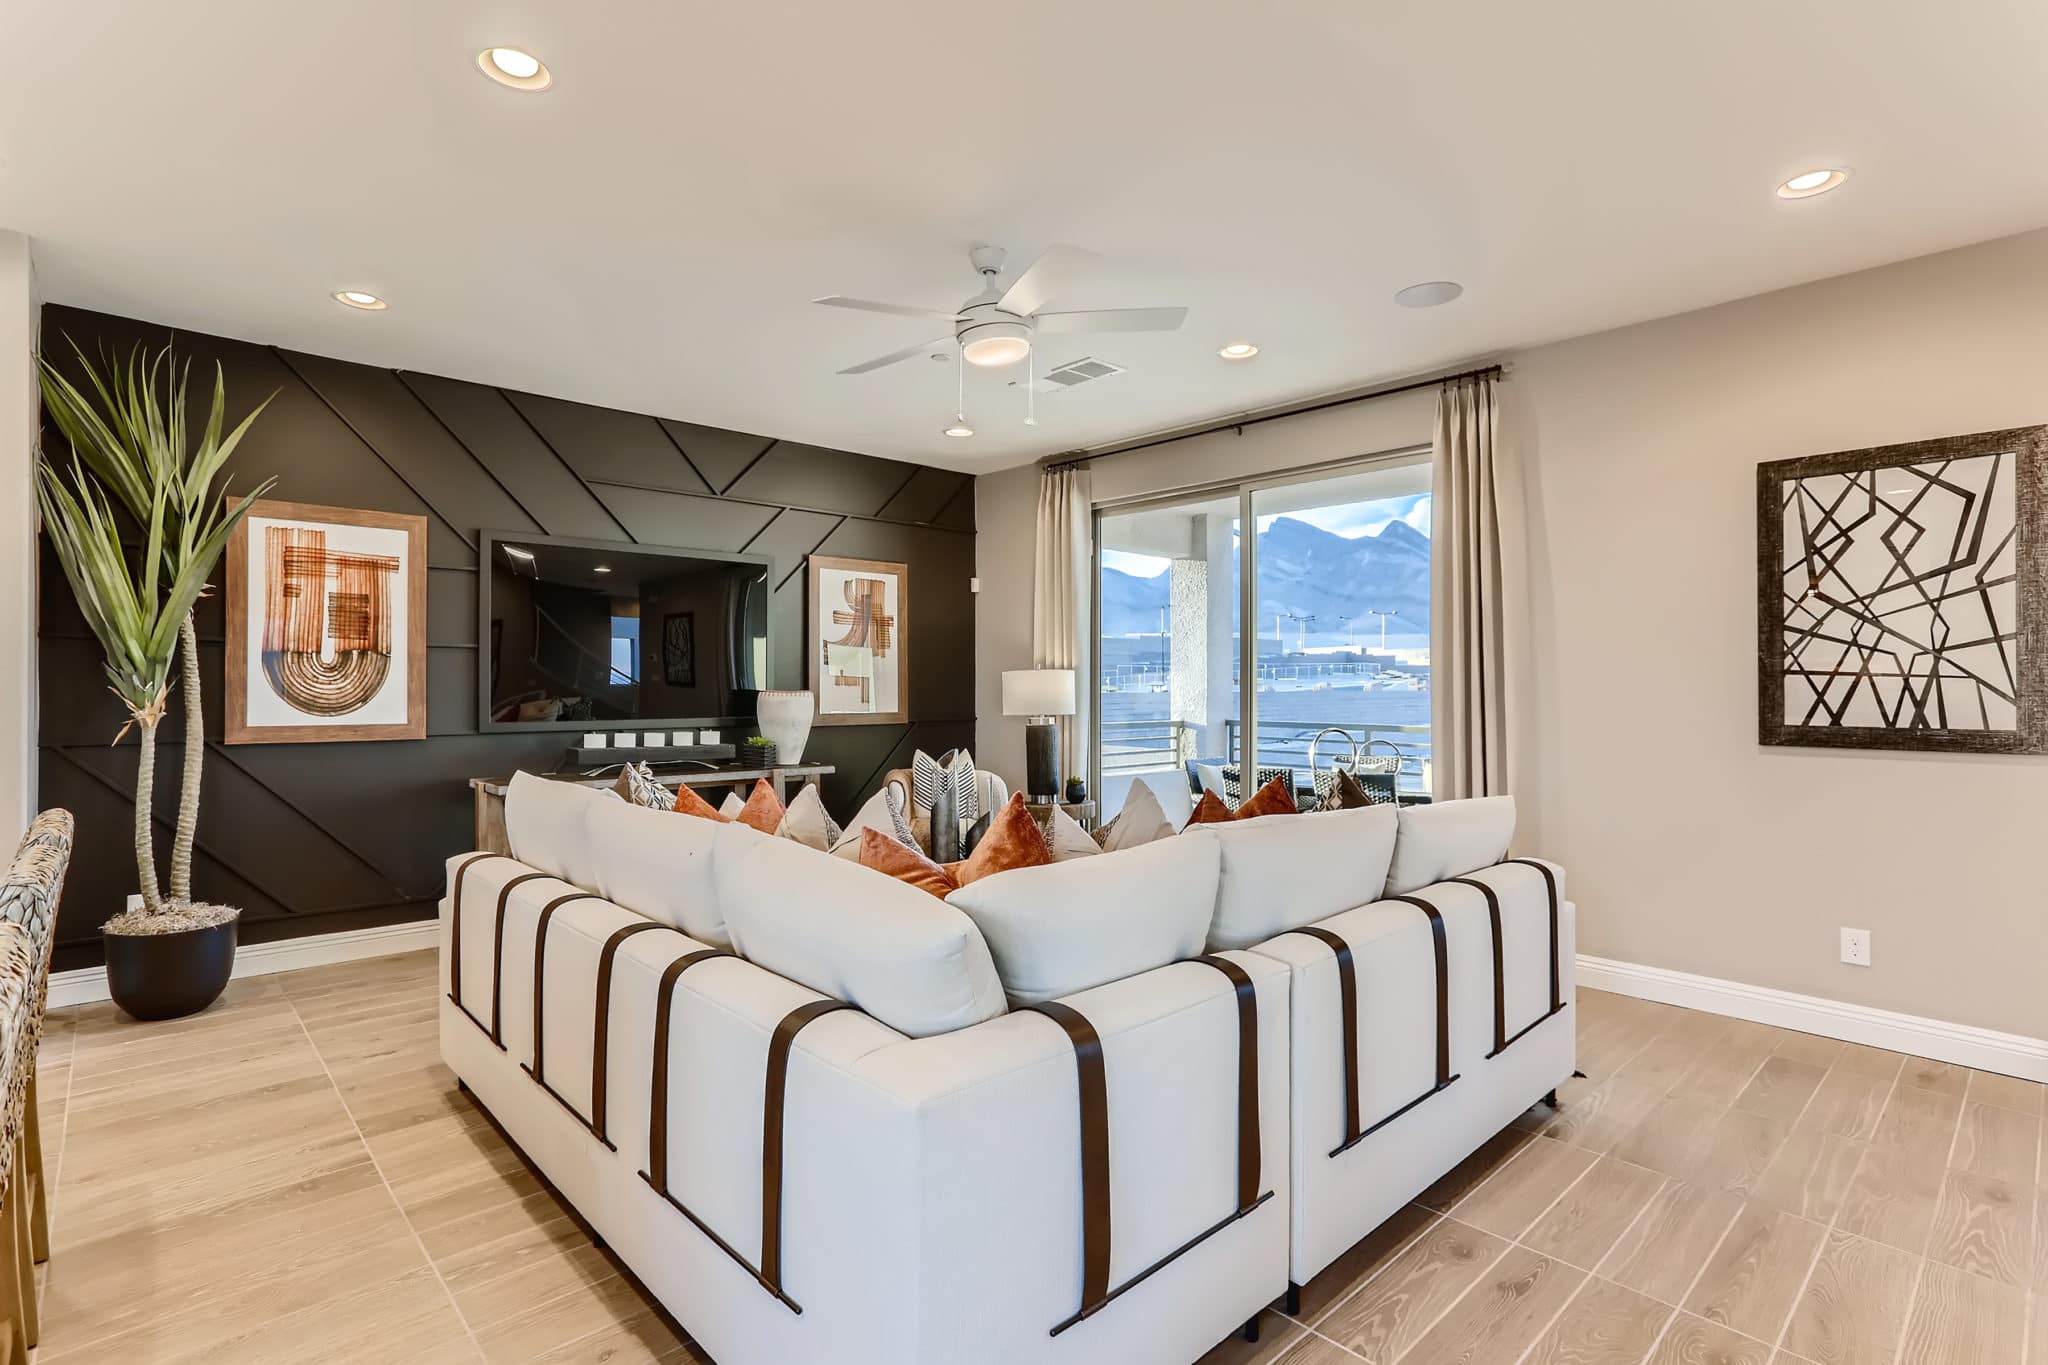 Living Room of Sapphire Plan 5 at Obsidian by Woodside